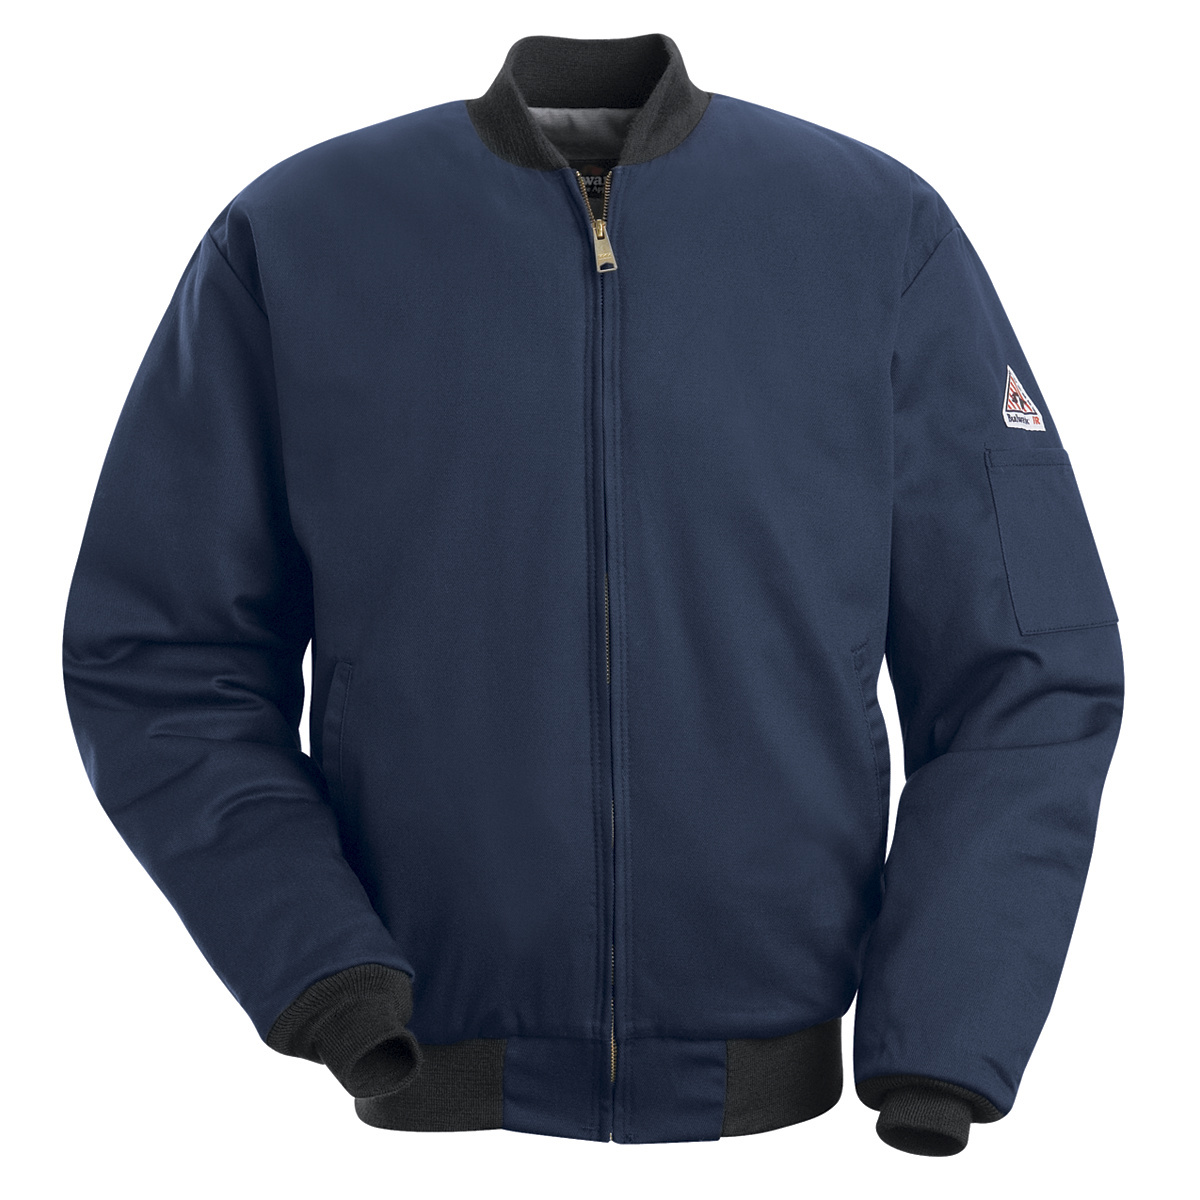 Bulwark® X-Large Regular Navy Blue EXCEL FR® Twill Cotton Water Repellent Flame Resistant Jacket With Cotton Lining And Zipper F